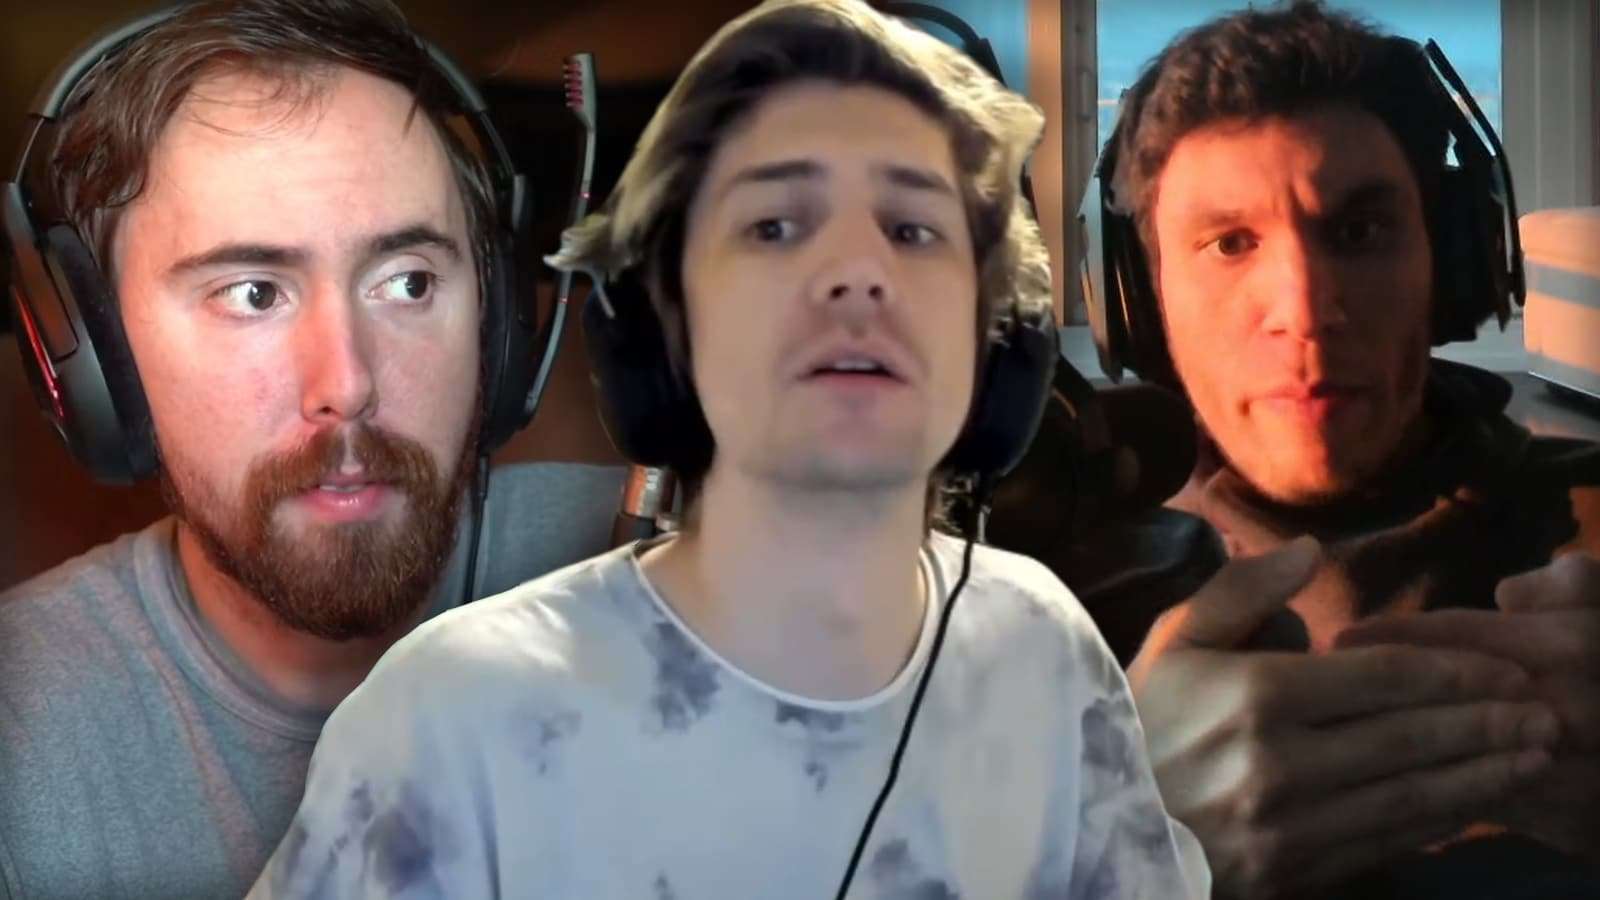 asmongold, xqc, and trainwrecks on twitch